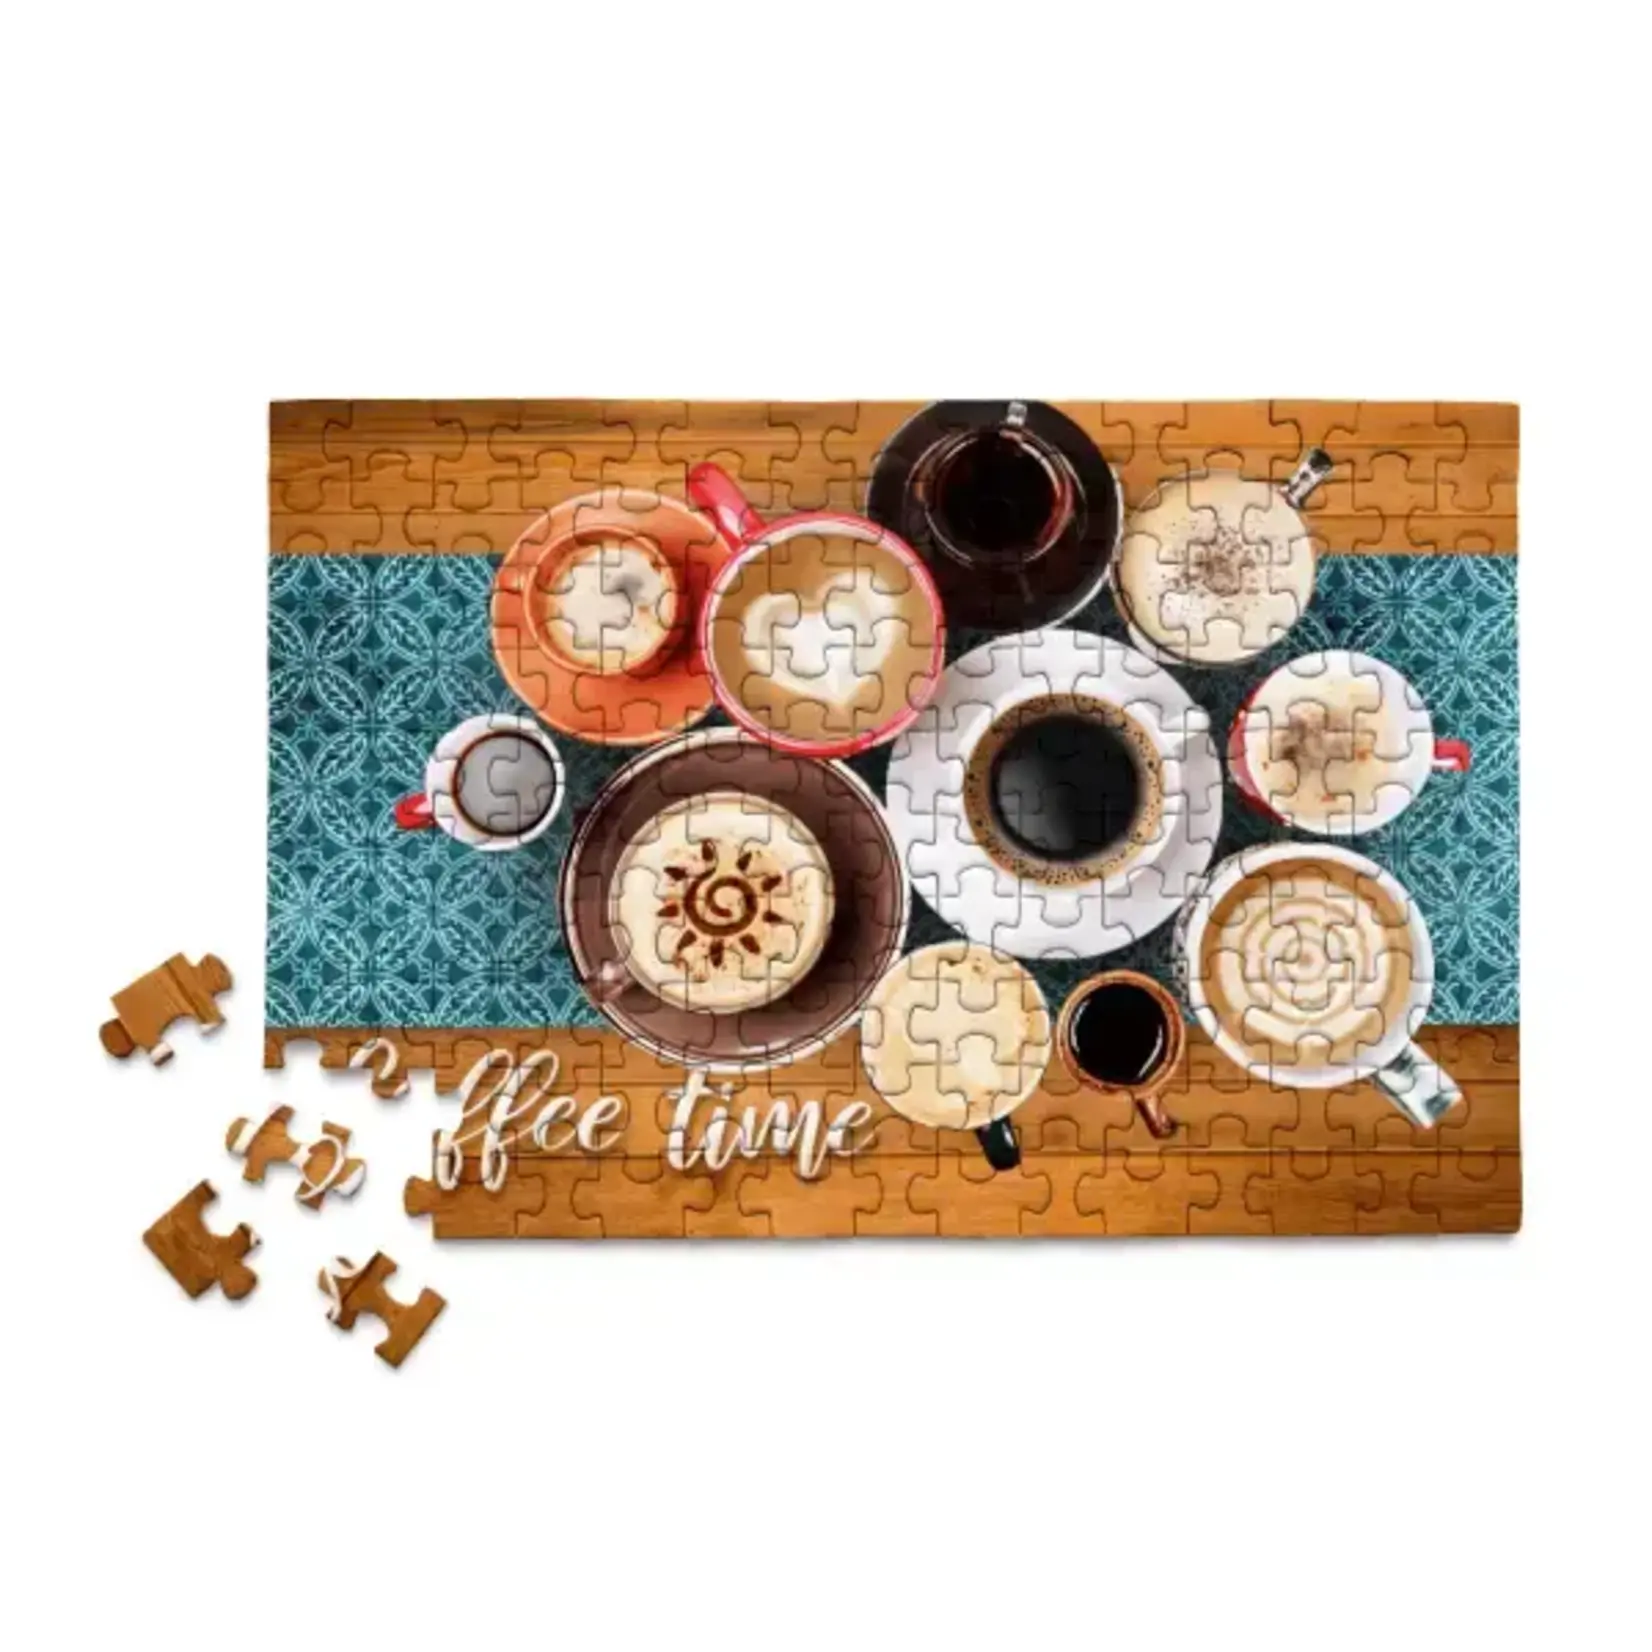 Micro Puzzles Puzzle Kaffee